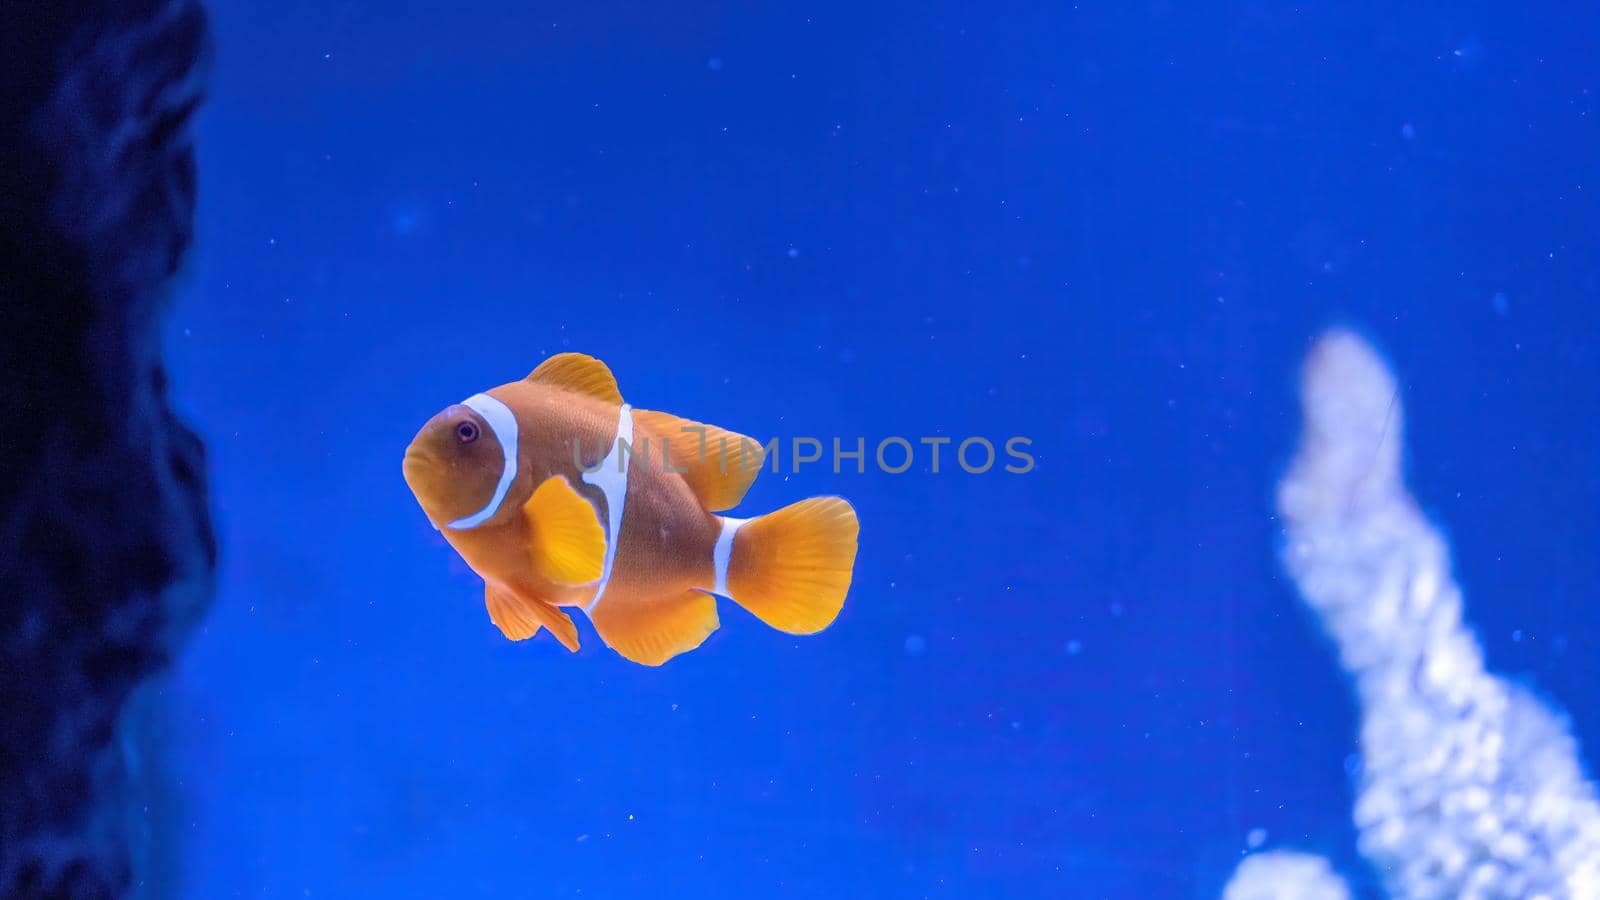 Colorful reef fish. Ocellaris clownfish, Amphiprion ocellaris, also known as the false percula clownfish or common clownfish